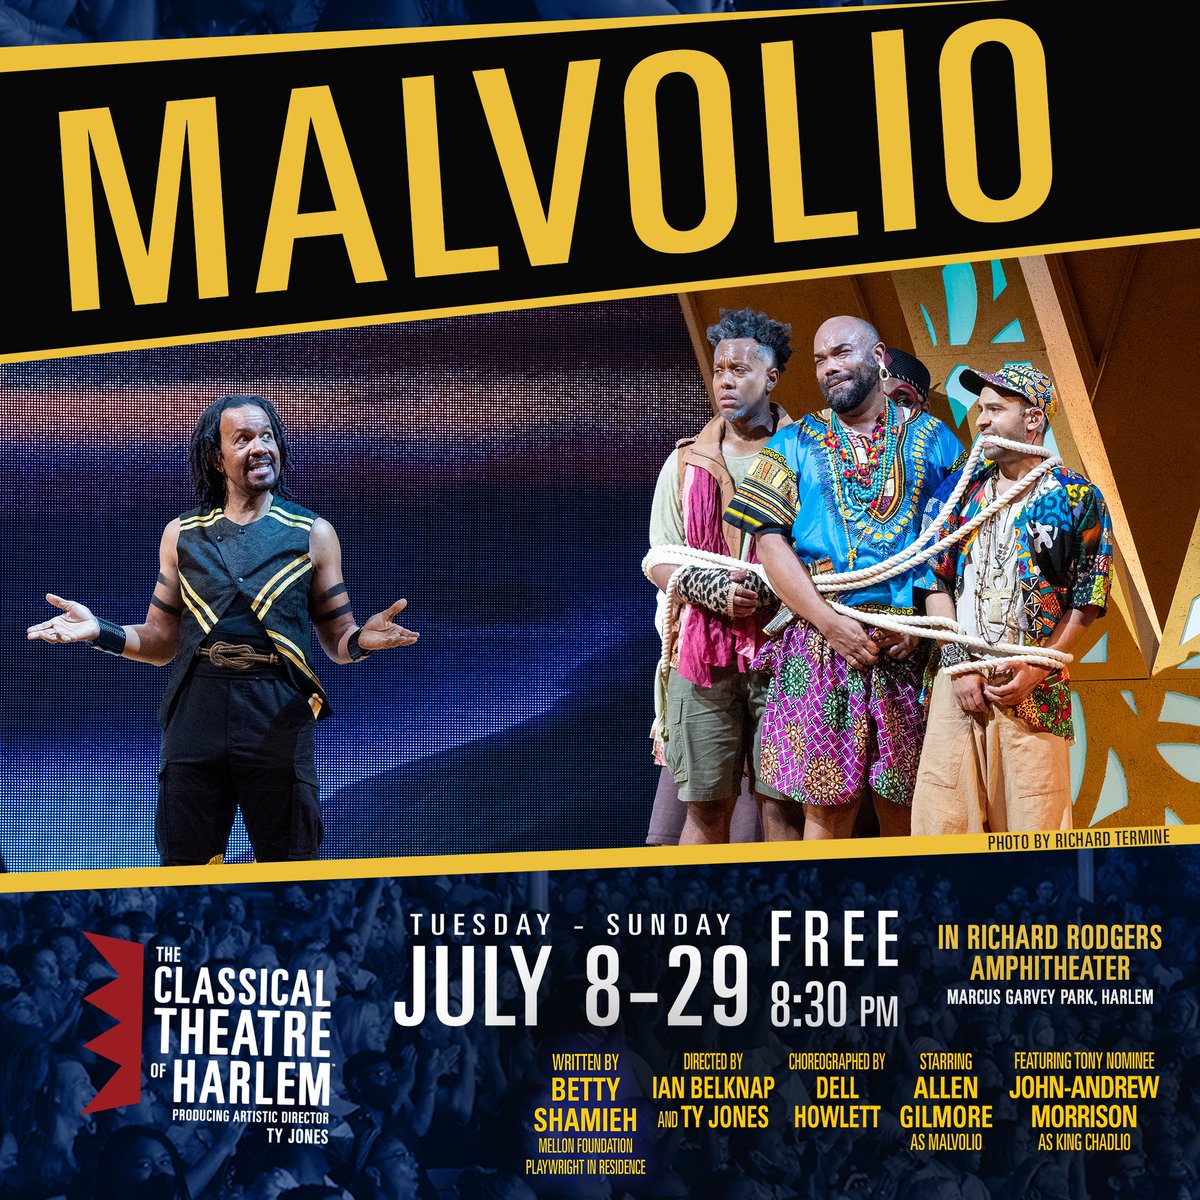 Did you know Twelfth Night made its debut 400 years ago? Malvolio’s revenge has been a LONG time coming! See Malvolio for free this summer! Performances run July 8-29, Tue-Sun, 8:30 PM. RSVP at cthnyc.org/malvolio It’s wartime. A lowborn steward, Malvolio, has risen to the